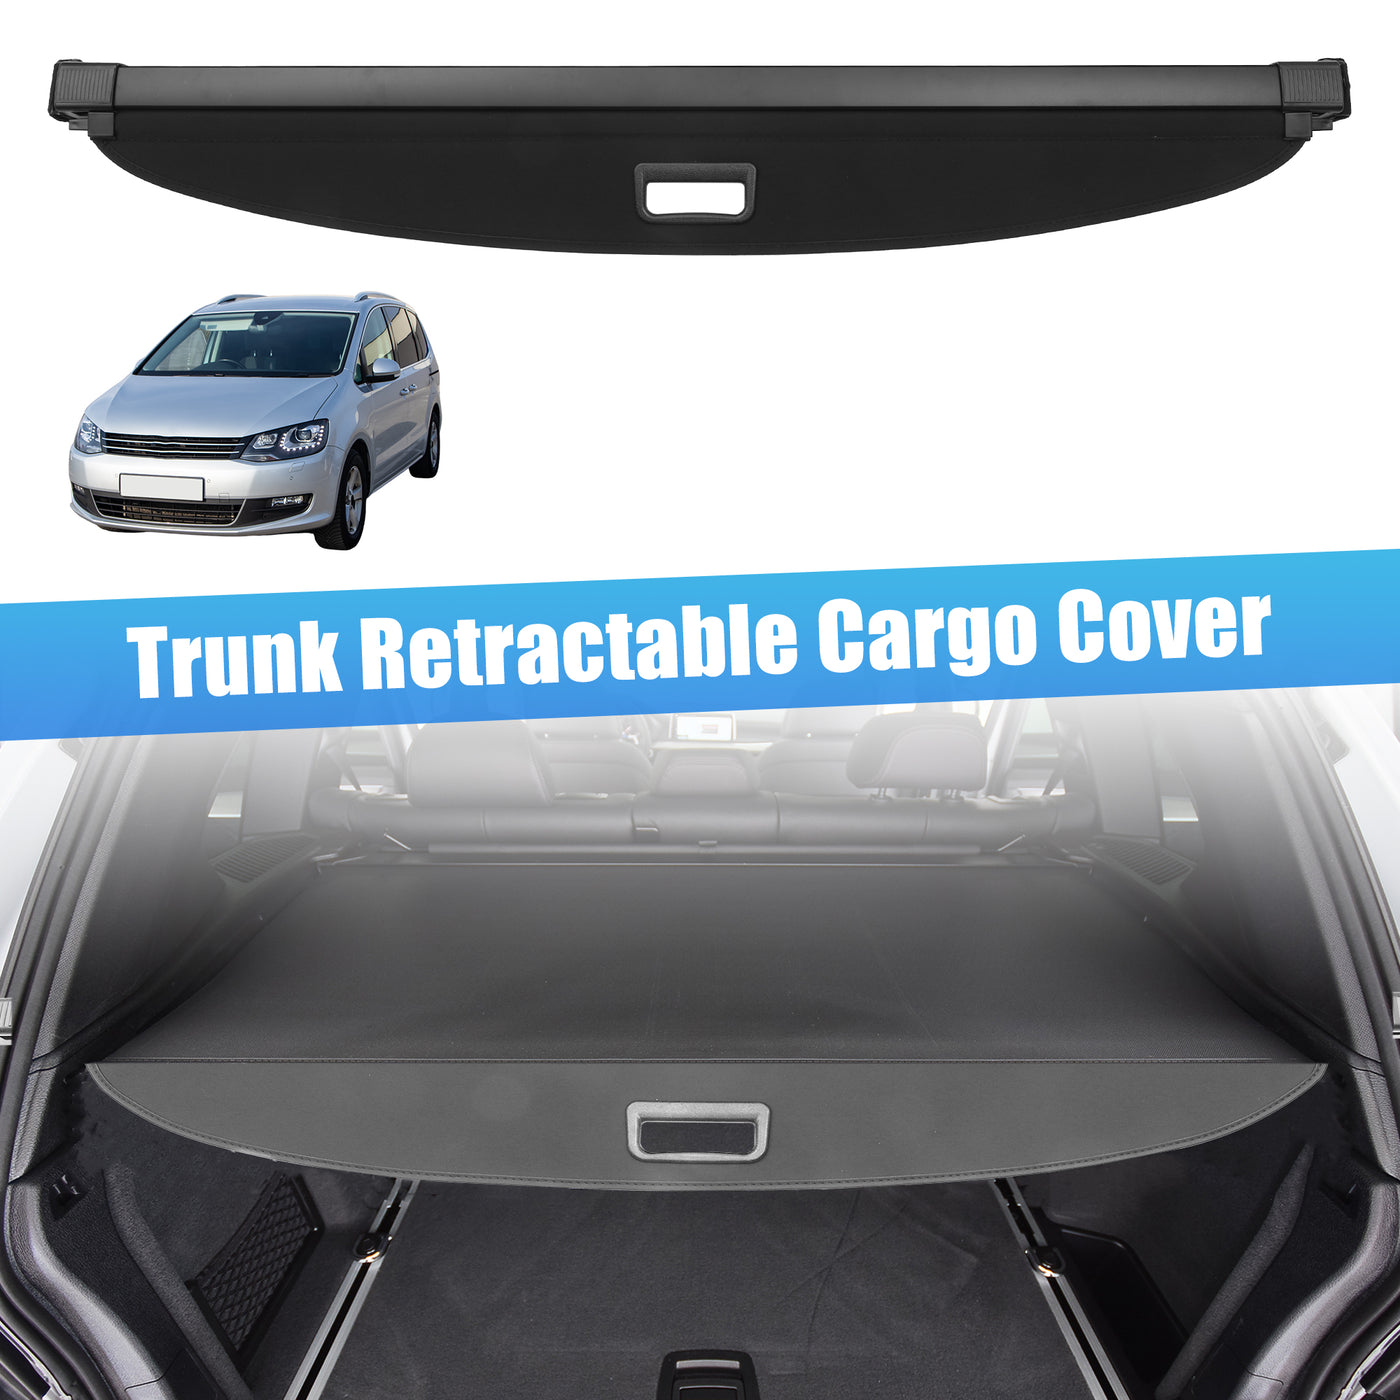 ACROPIX Retractable Cargo Cover Rear Trunk Security Cover Shield Shade Adjustable Fit for Volkswagen  2012-2019 - Pack of 1